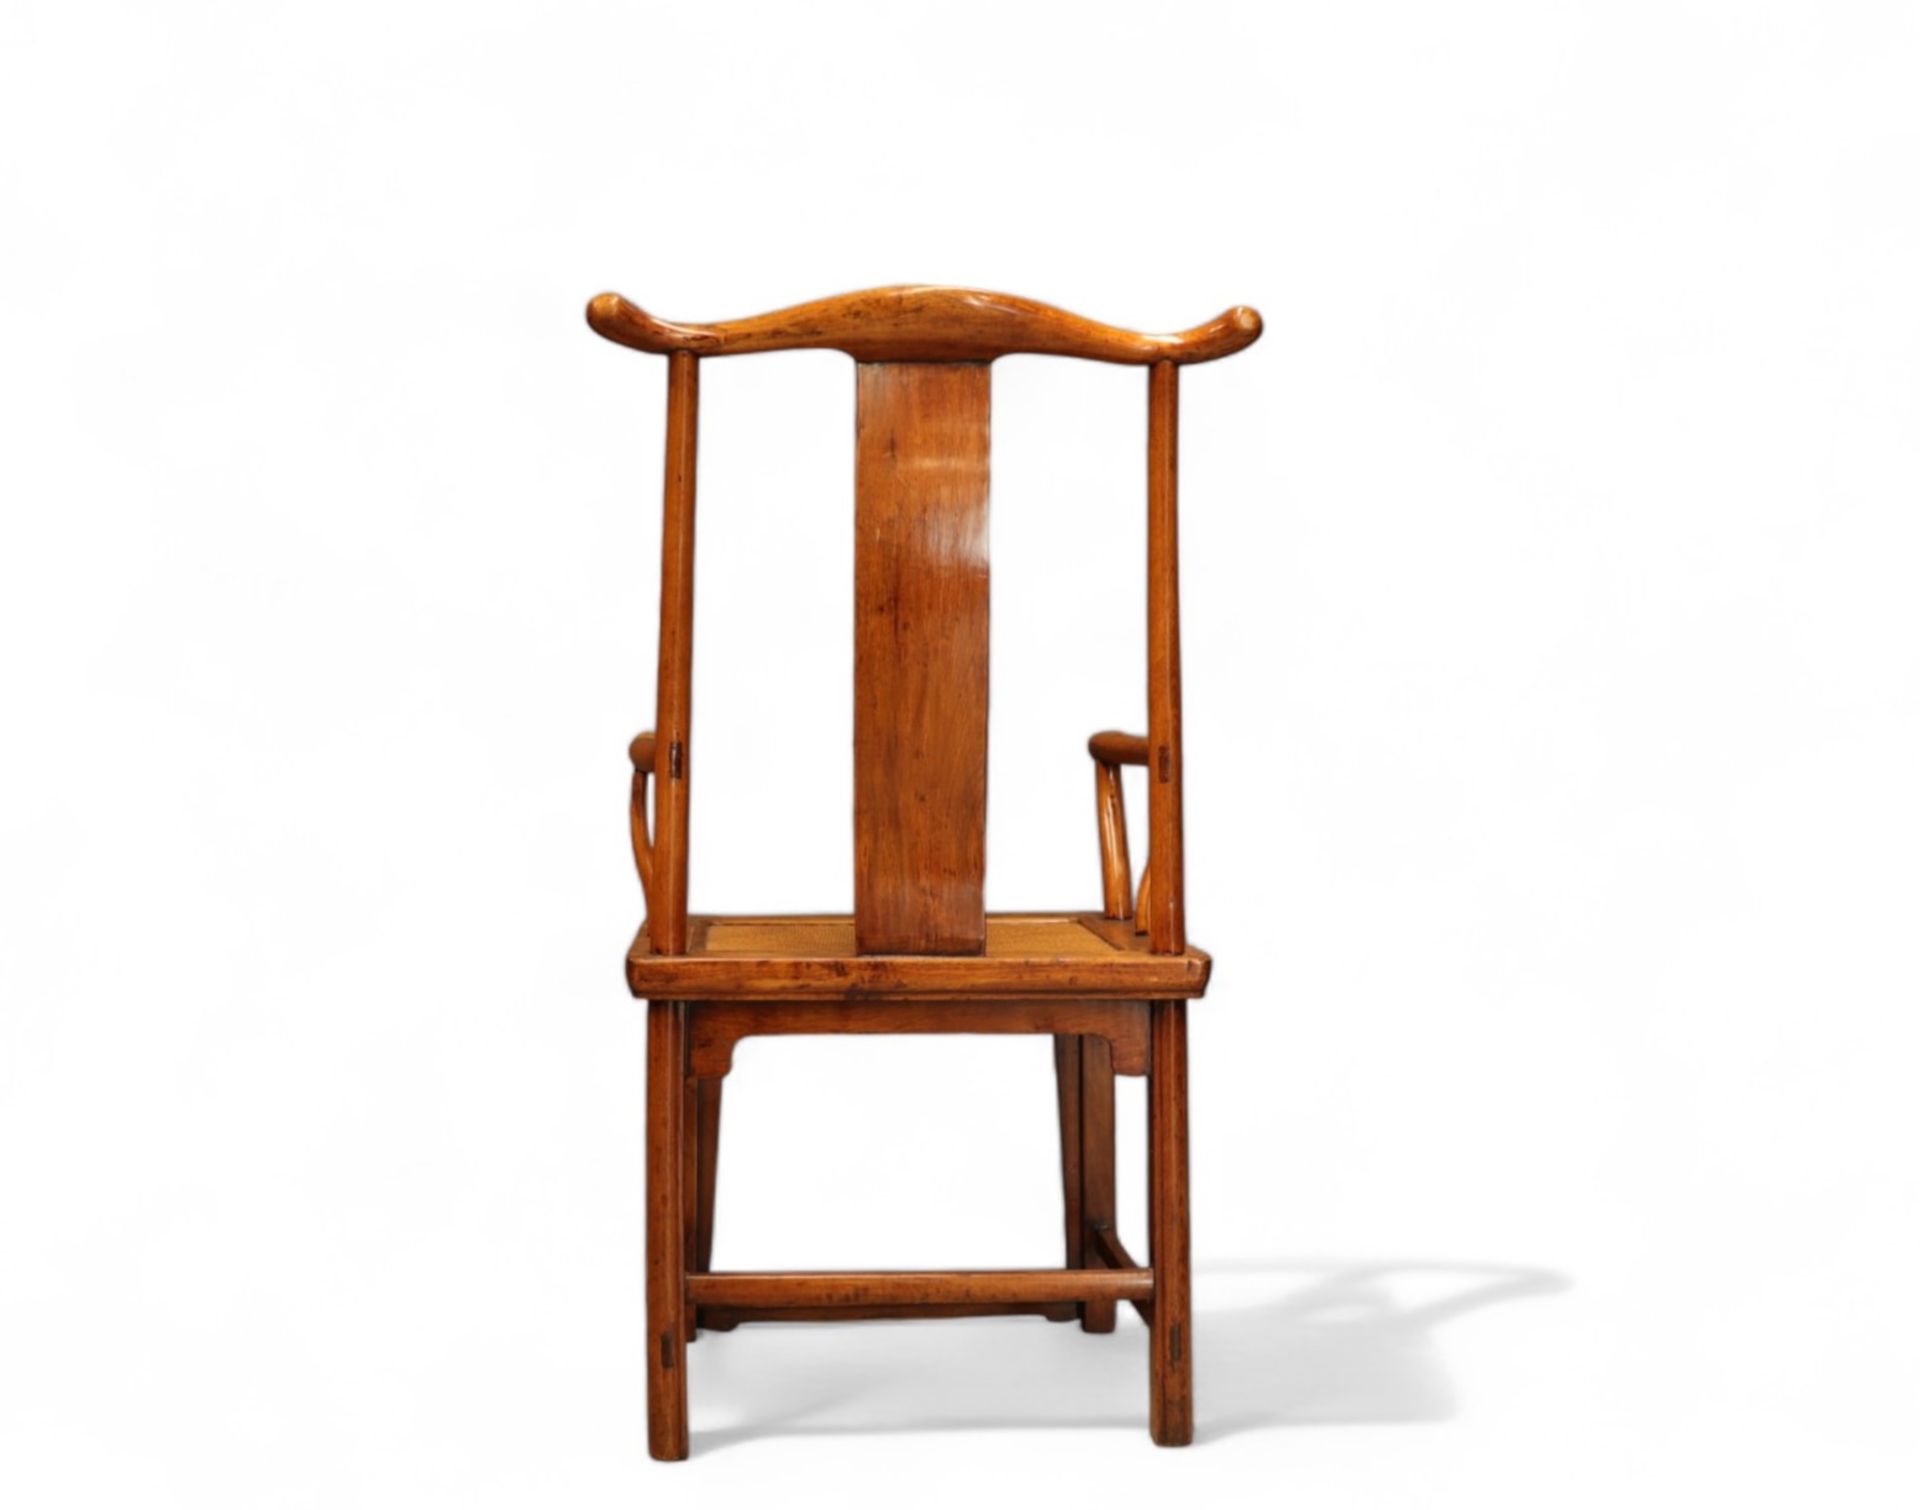 China - Exotic wood dignitary chair, caned seat, Qing dynasty. - Bild 3 aus 3